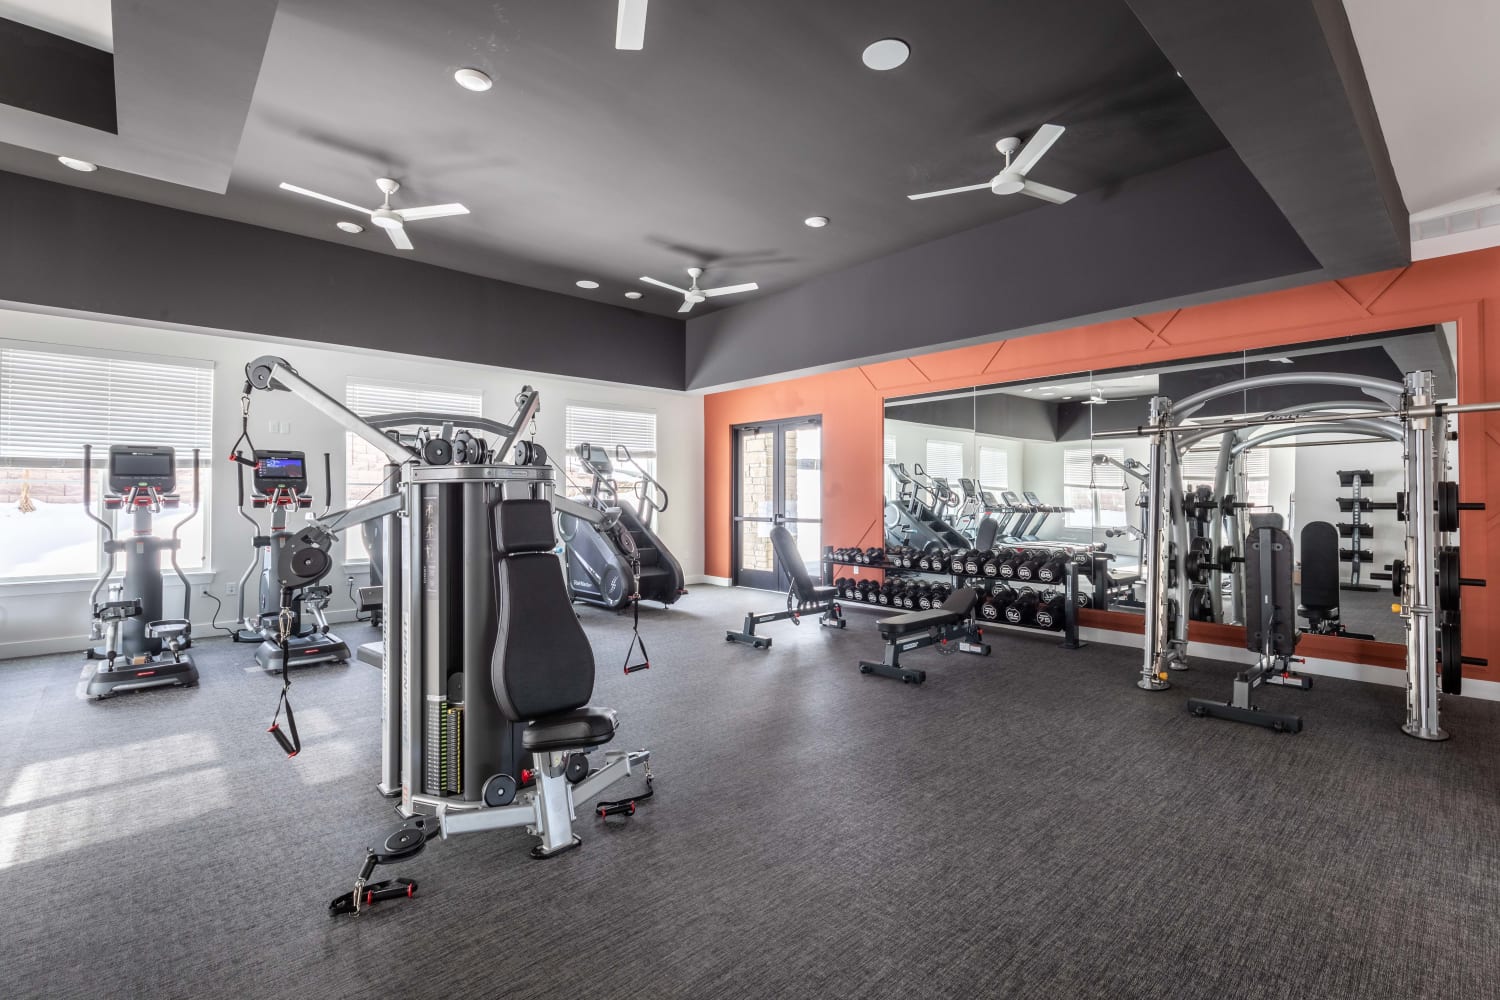 Fully equipped fitness center at The Prospector Modern Apartments in Castle Rock, Colorado